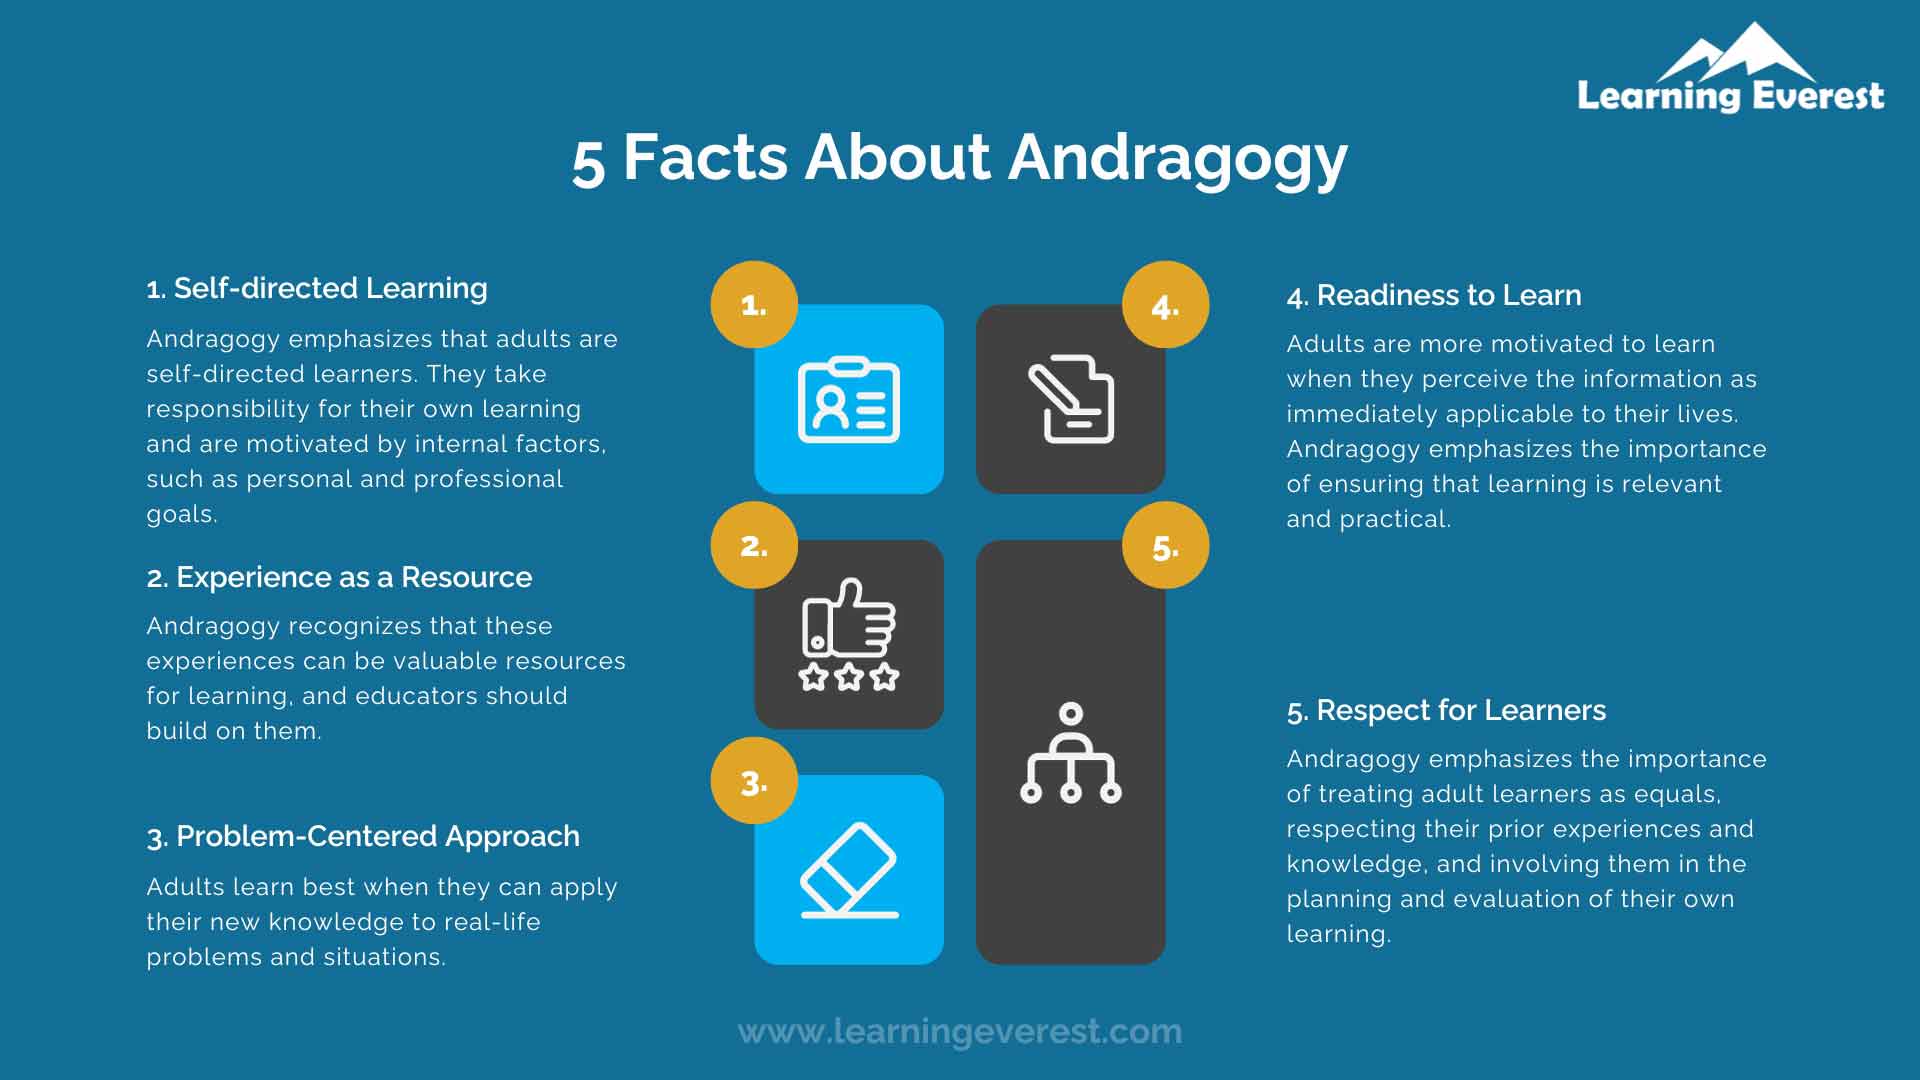 5 Facts About Andragogy